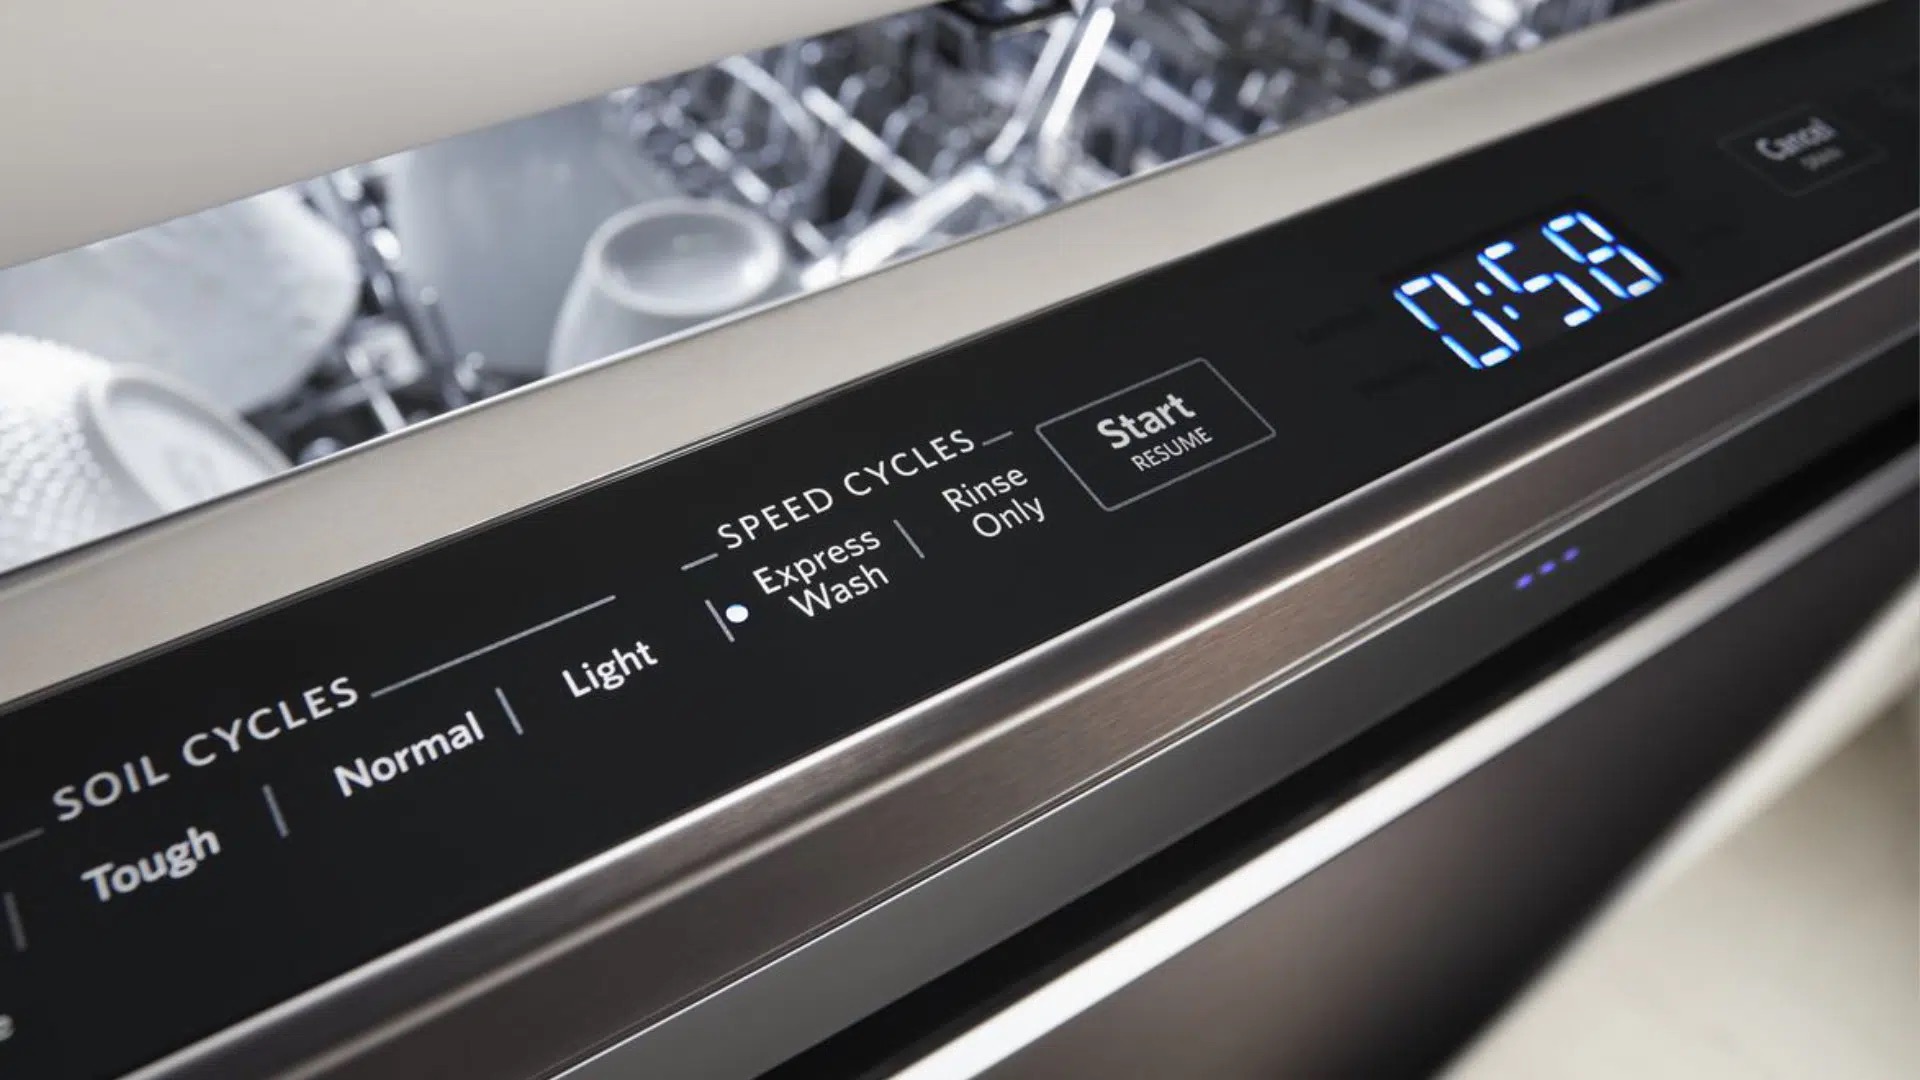 How To Fix The Error Code 6-4 For Maytag Dishwasher